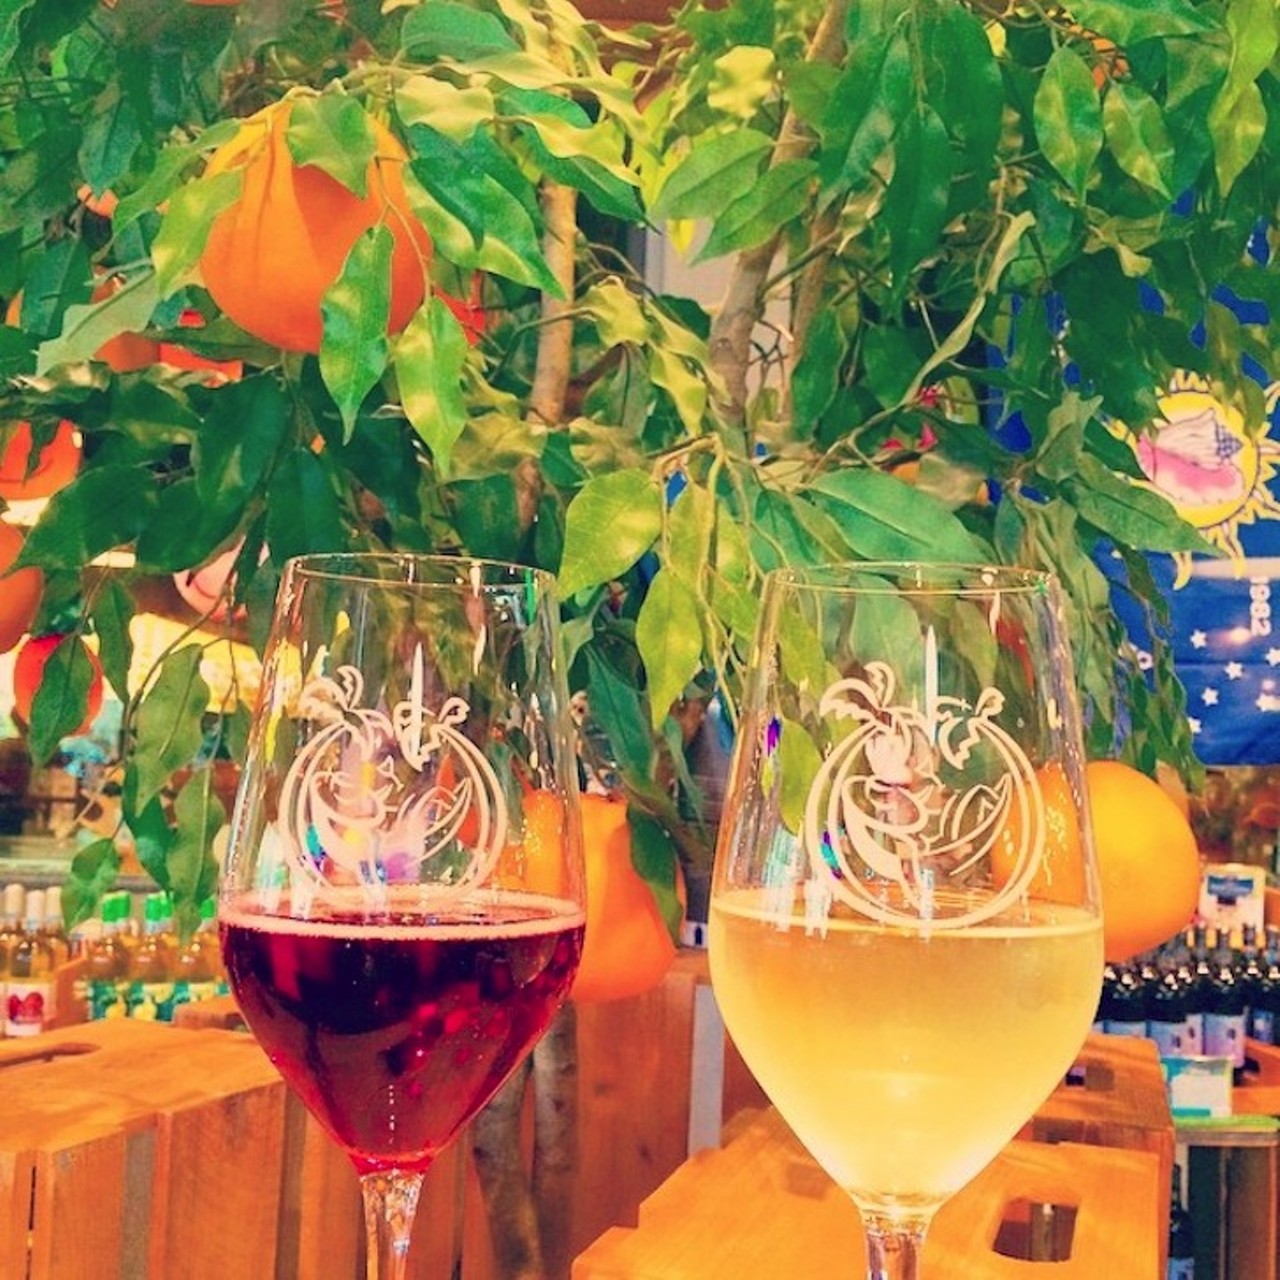 Florida Orange Groves Winery
1500 S. Pasadena Ave., South Pasadena | (800) 338-7923
This winery boasts that it sells &#147;wines that taste good,&#148; an accurate description of the 43 different beverages blended not from grapes, but from various tropical fruits. 
Photo via jilldigioia/Instagram